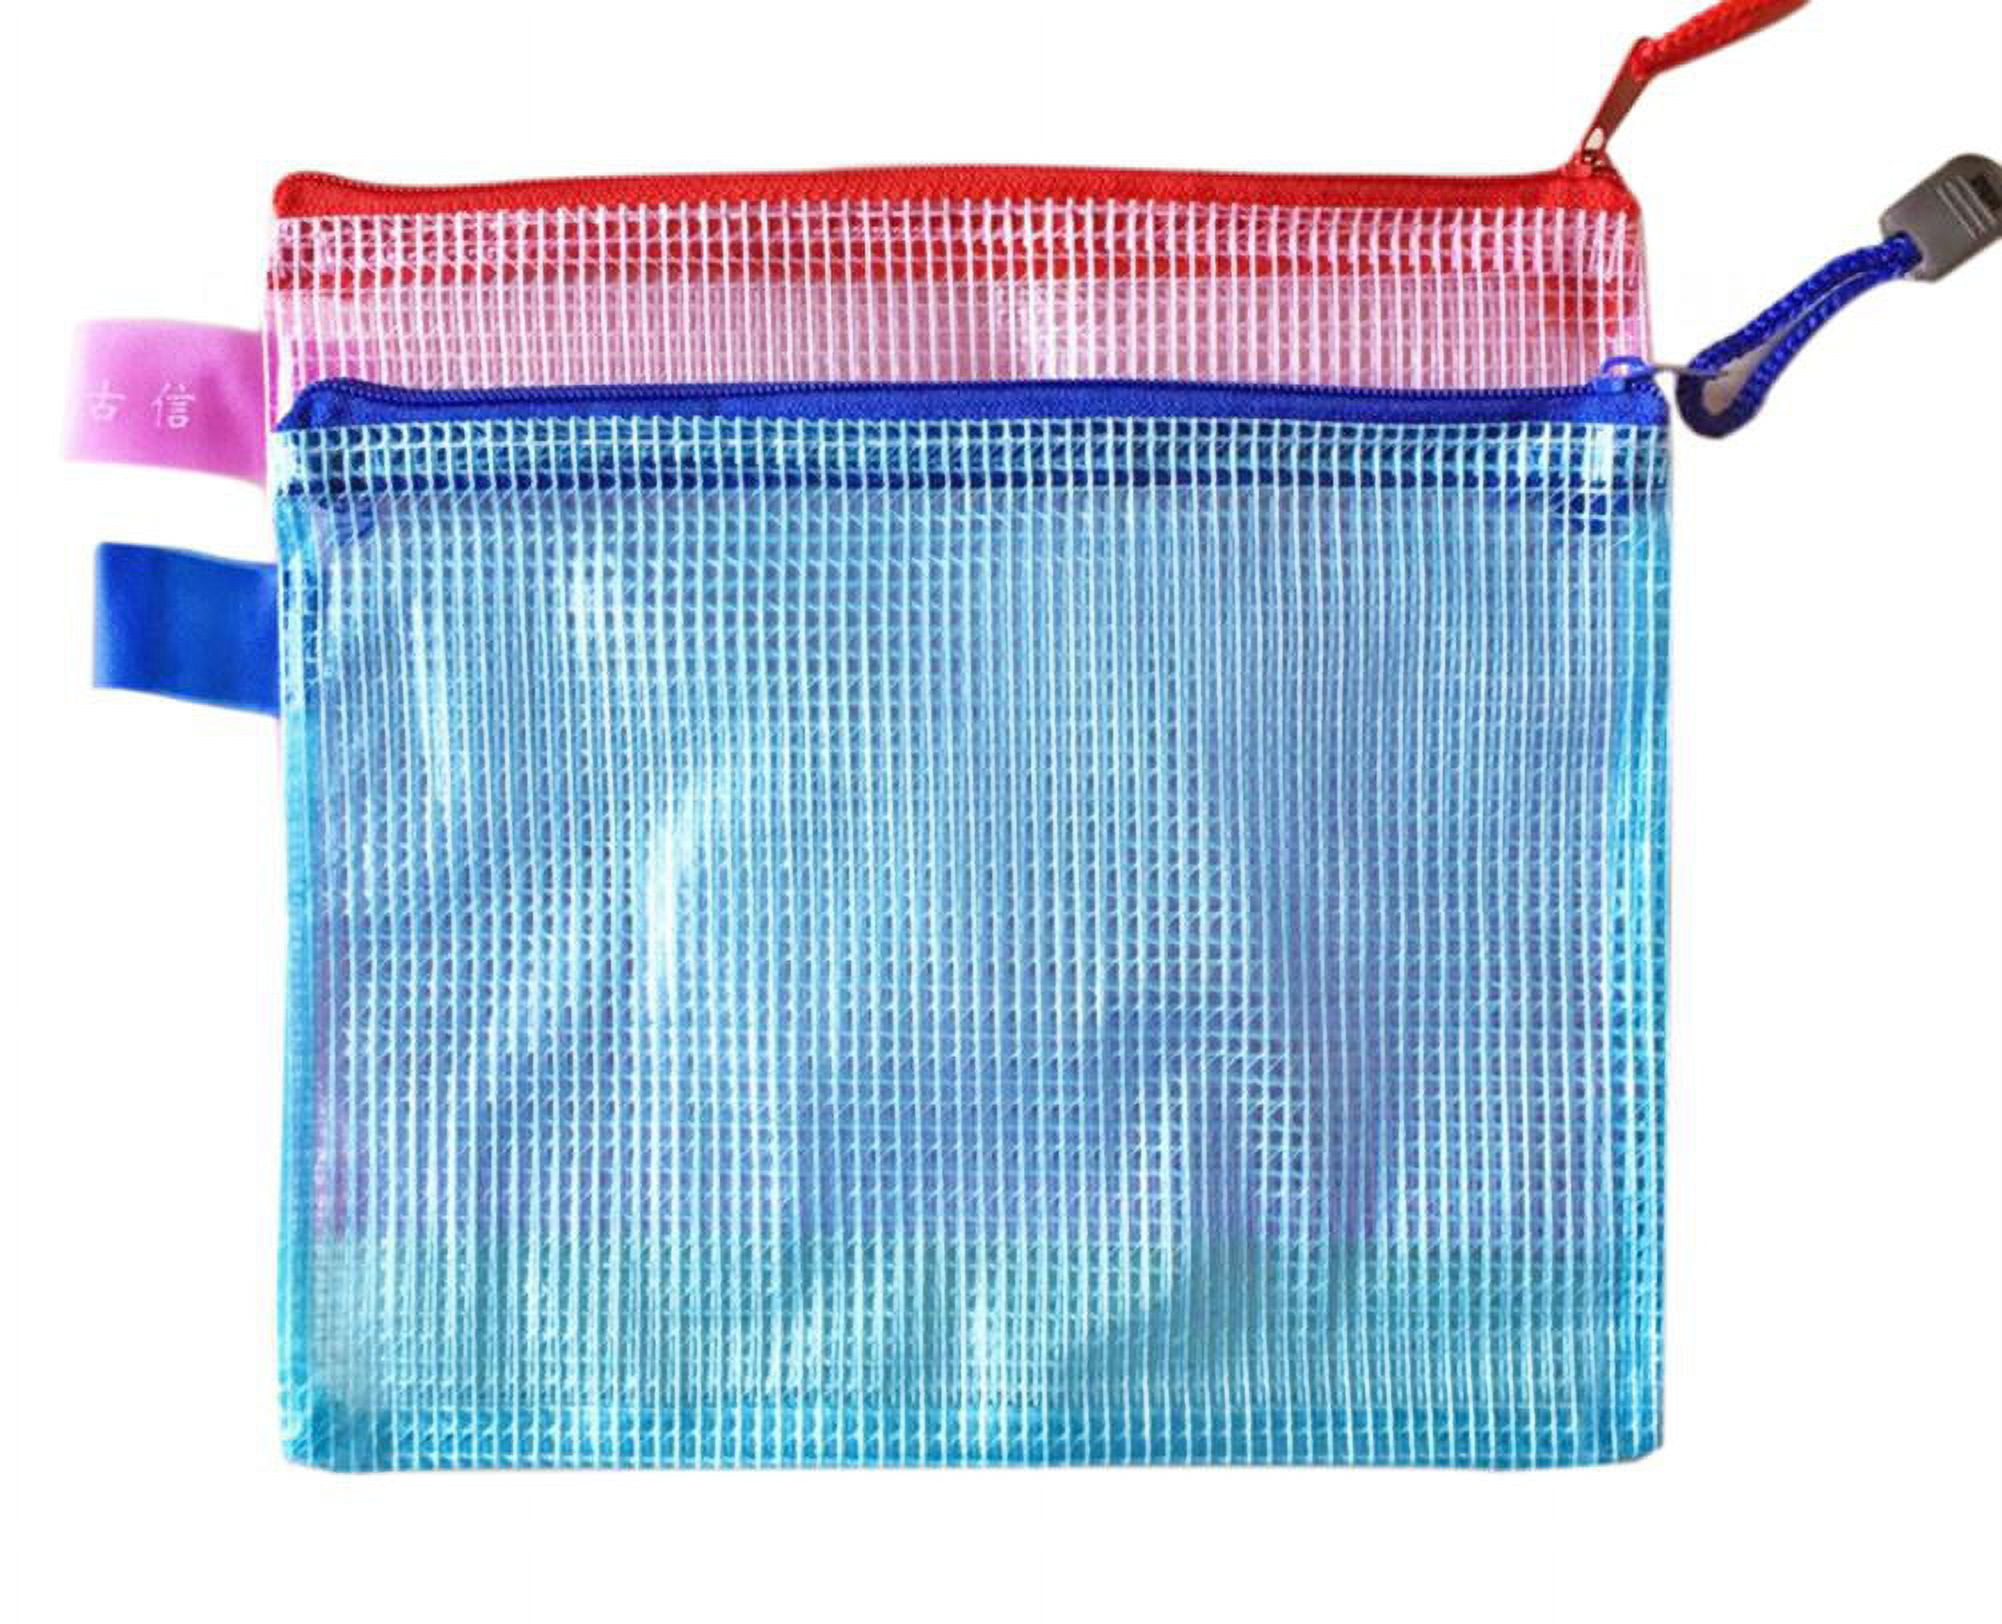  5 PCS Mesh Zipper Pouch, 9x 13 Waterproof Multiuse Zipper  Bags for Organizing, A4 Letter Size Puzzle Bags for Office School Supplies  Travel Board Game Organizers and Storage (5 Colors) 